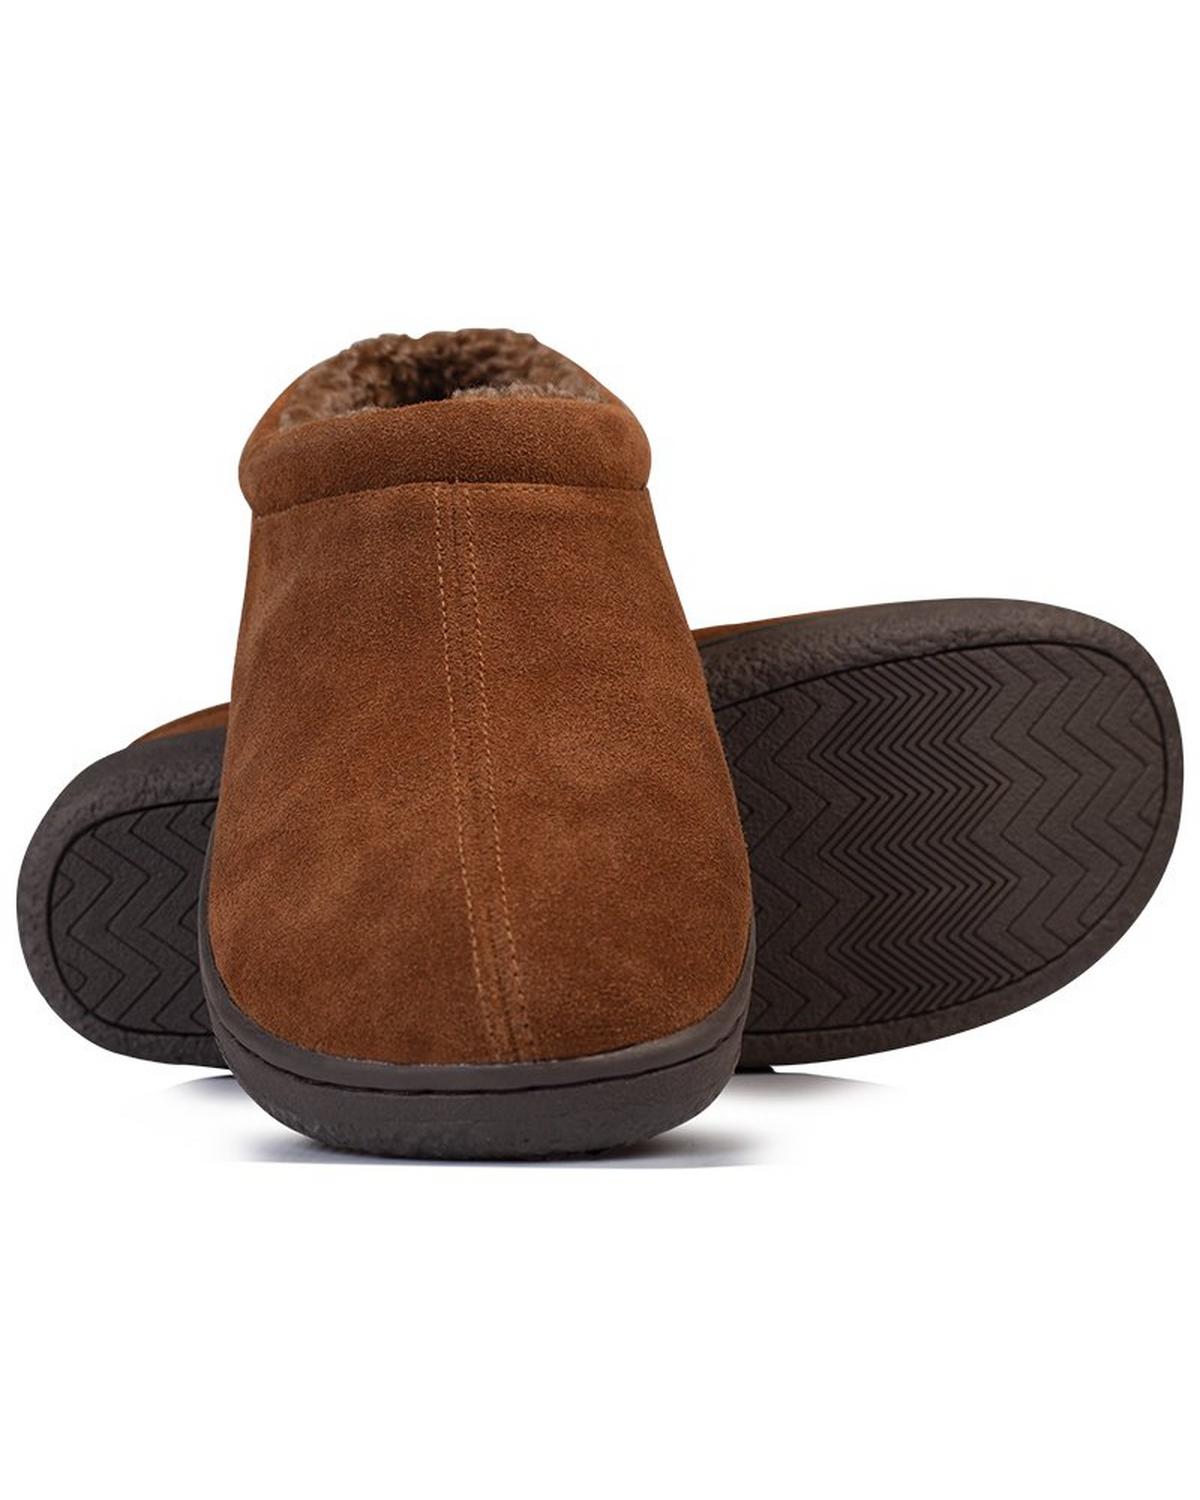 Cape Union Men's Barnsley Slippers -  Brown/Chocolate